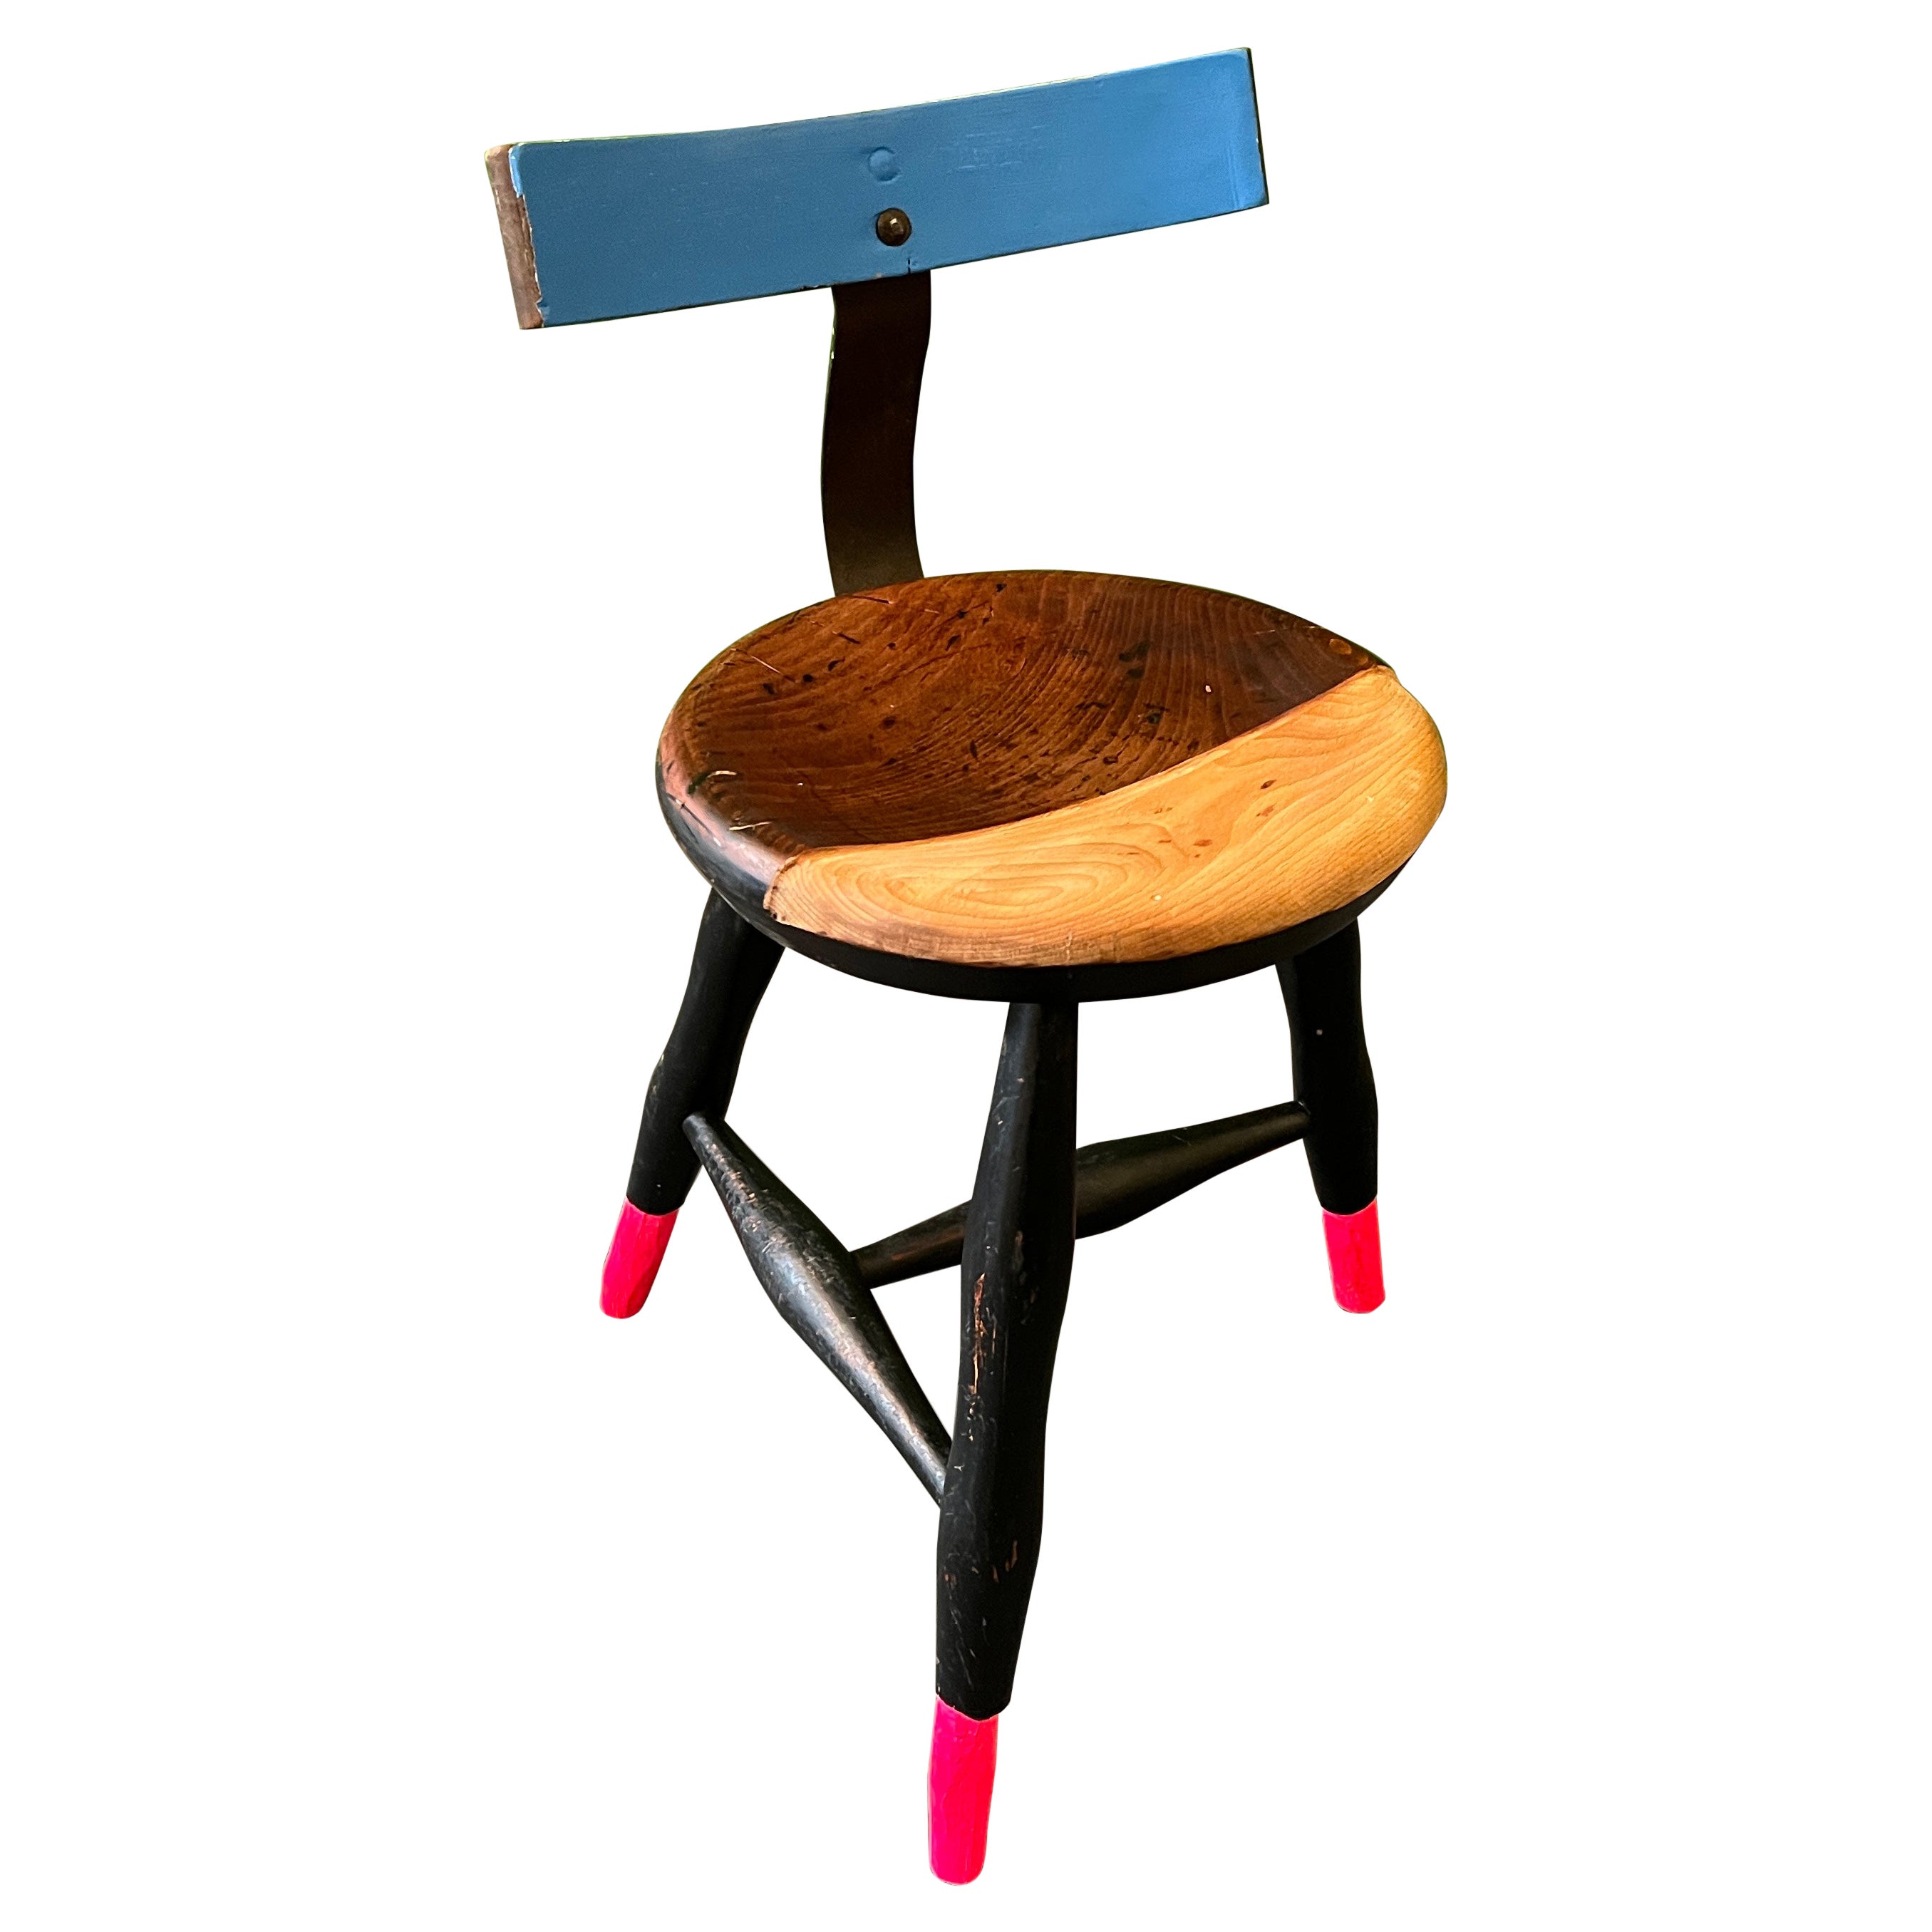 German Cherry Workstool "kiss the future" by Markus Friedrich Staab For Sale